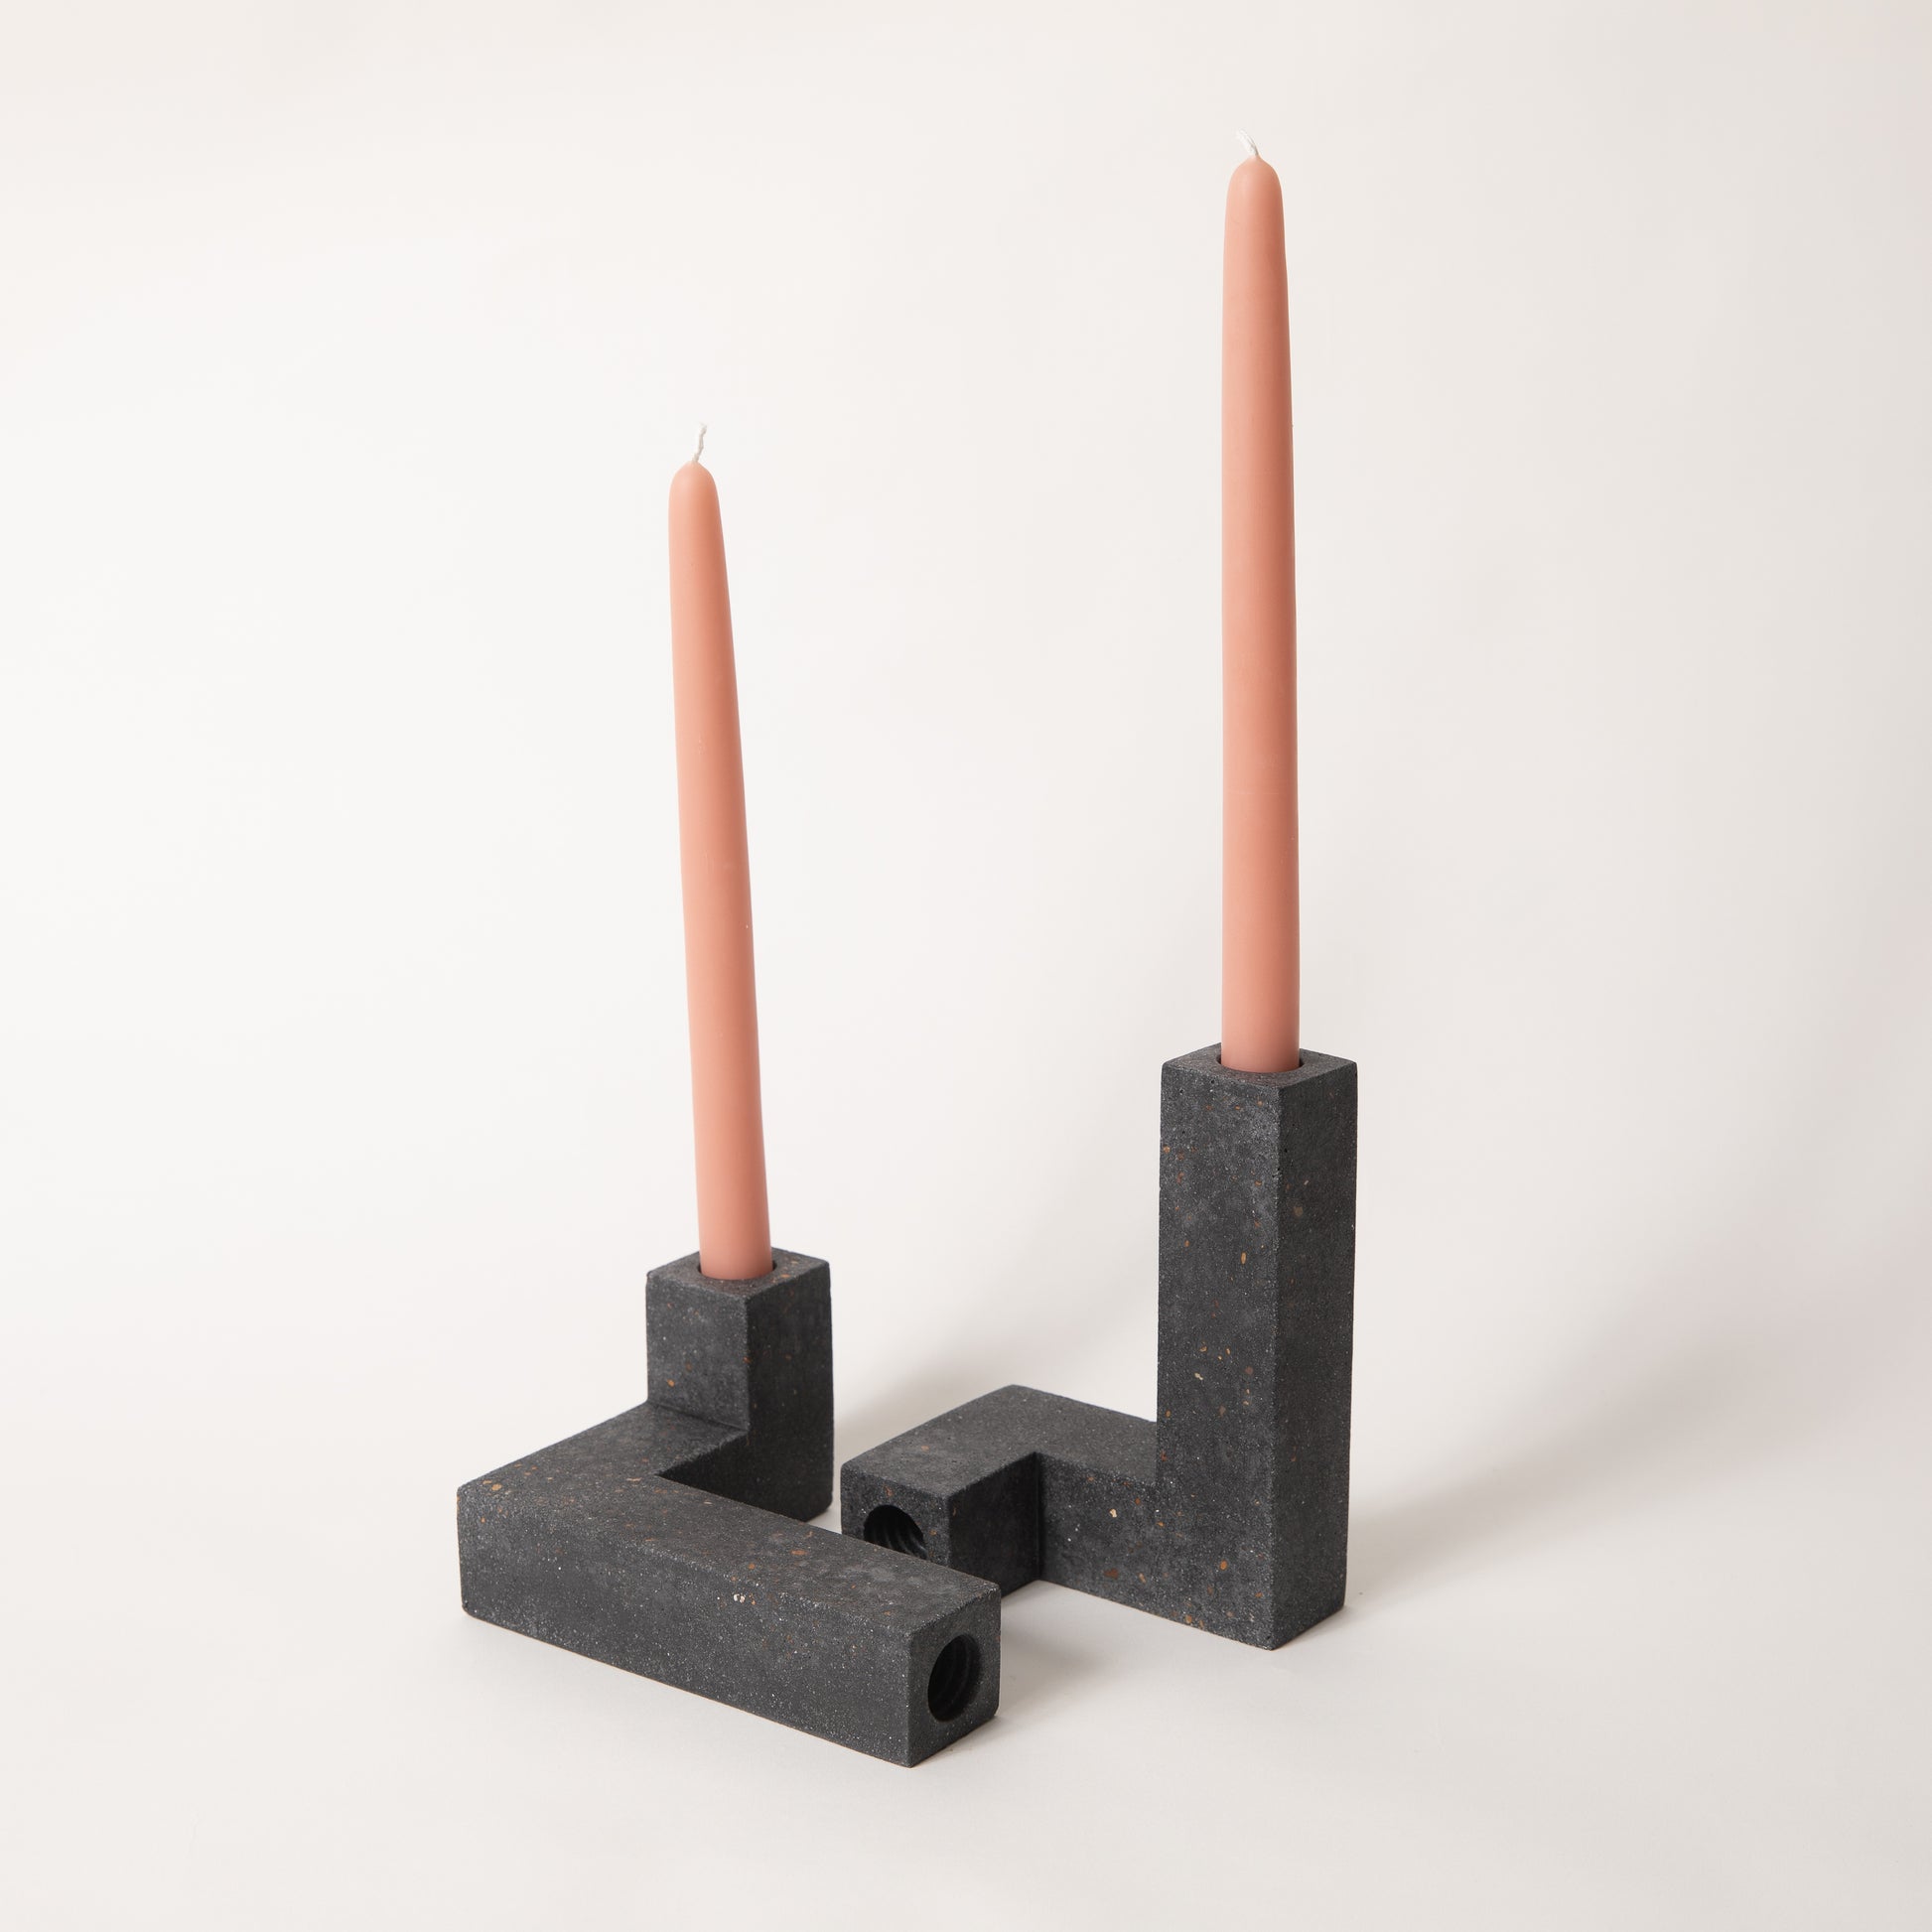 Mo&Co. Home Hand-Dipped Tapers in Terra Cotta, styled in our black terrazzo candlestick set.